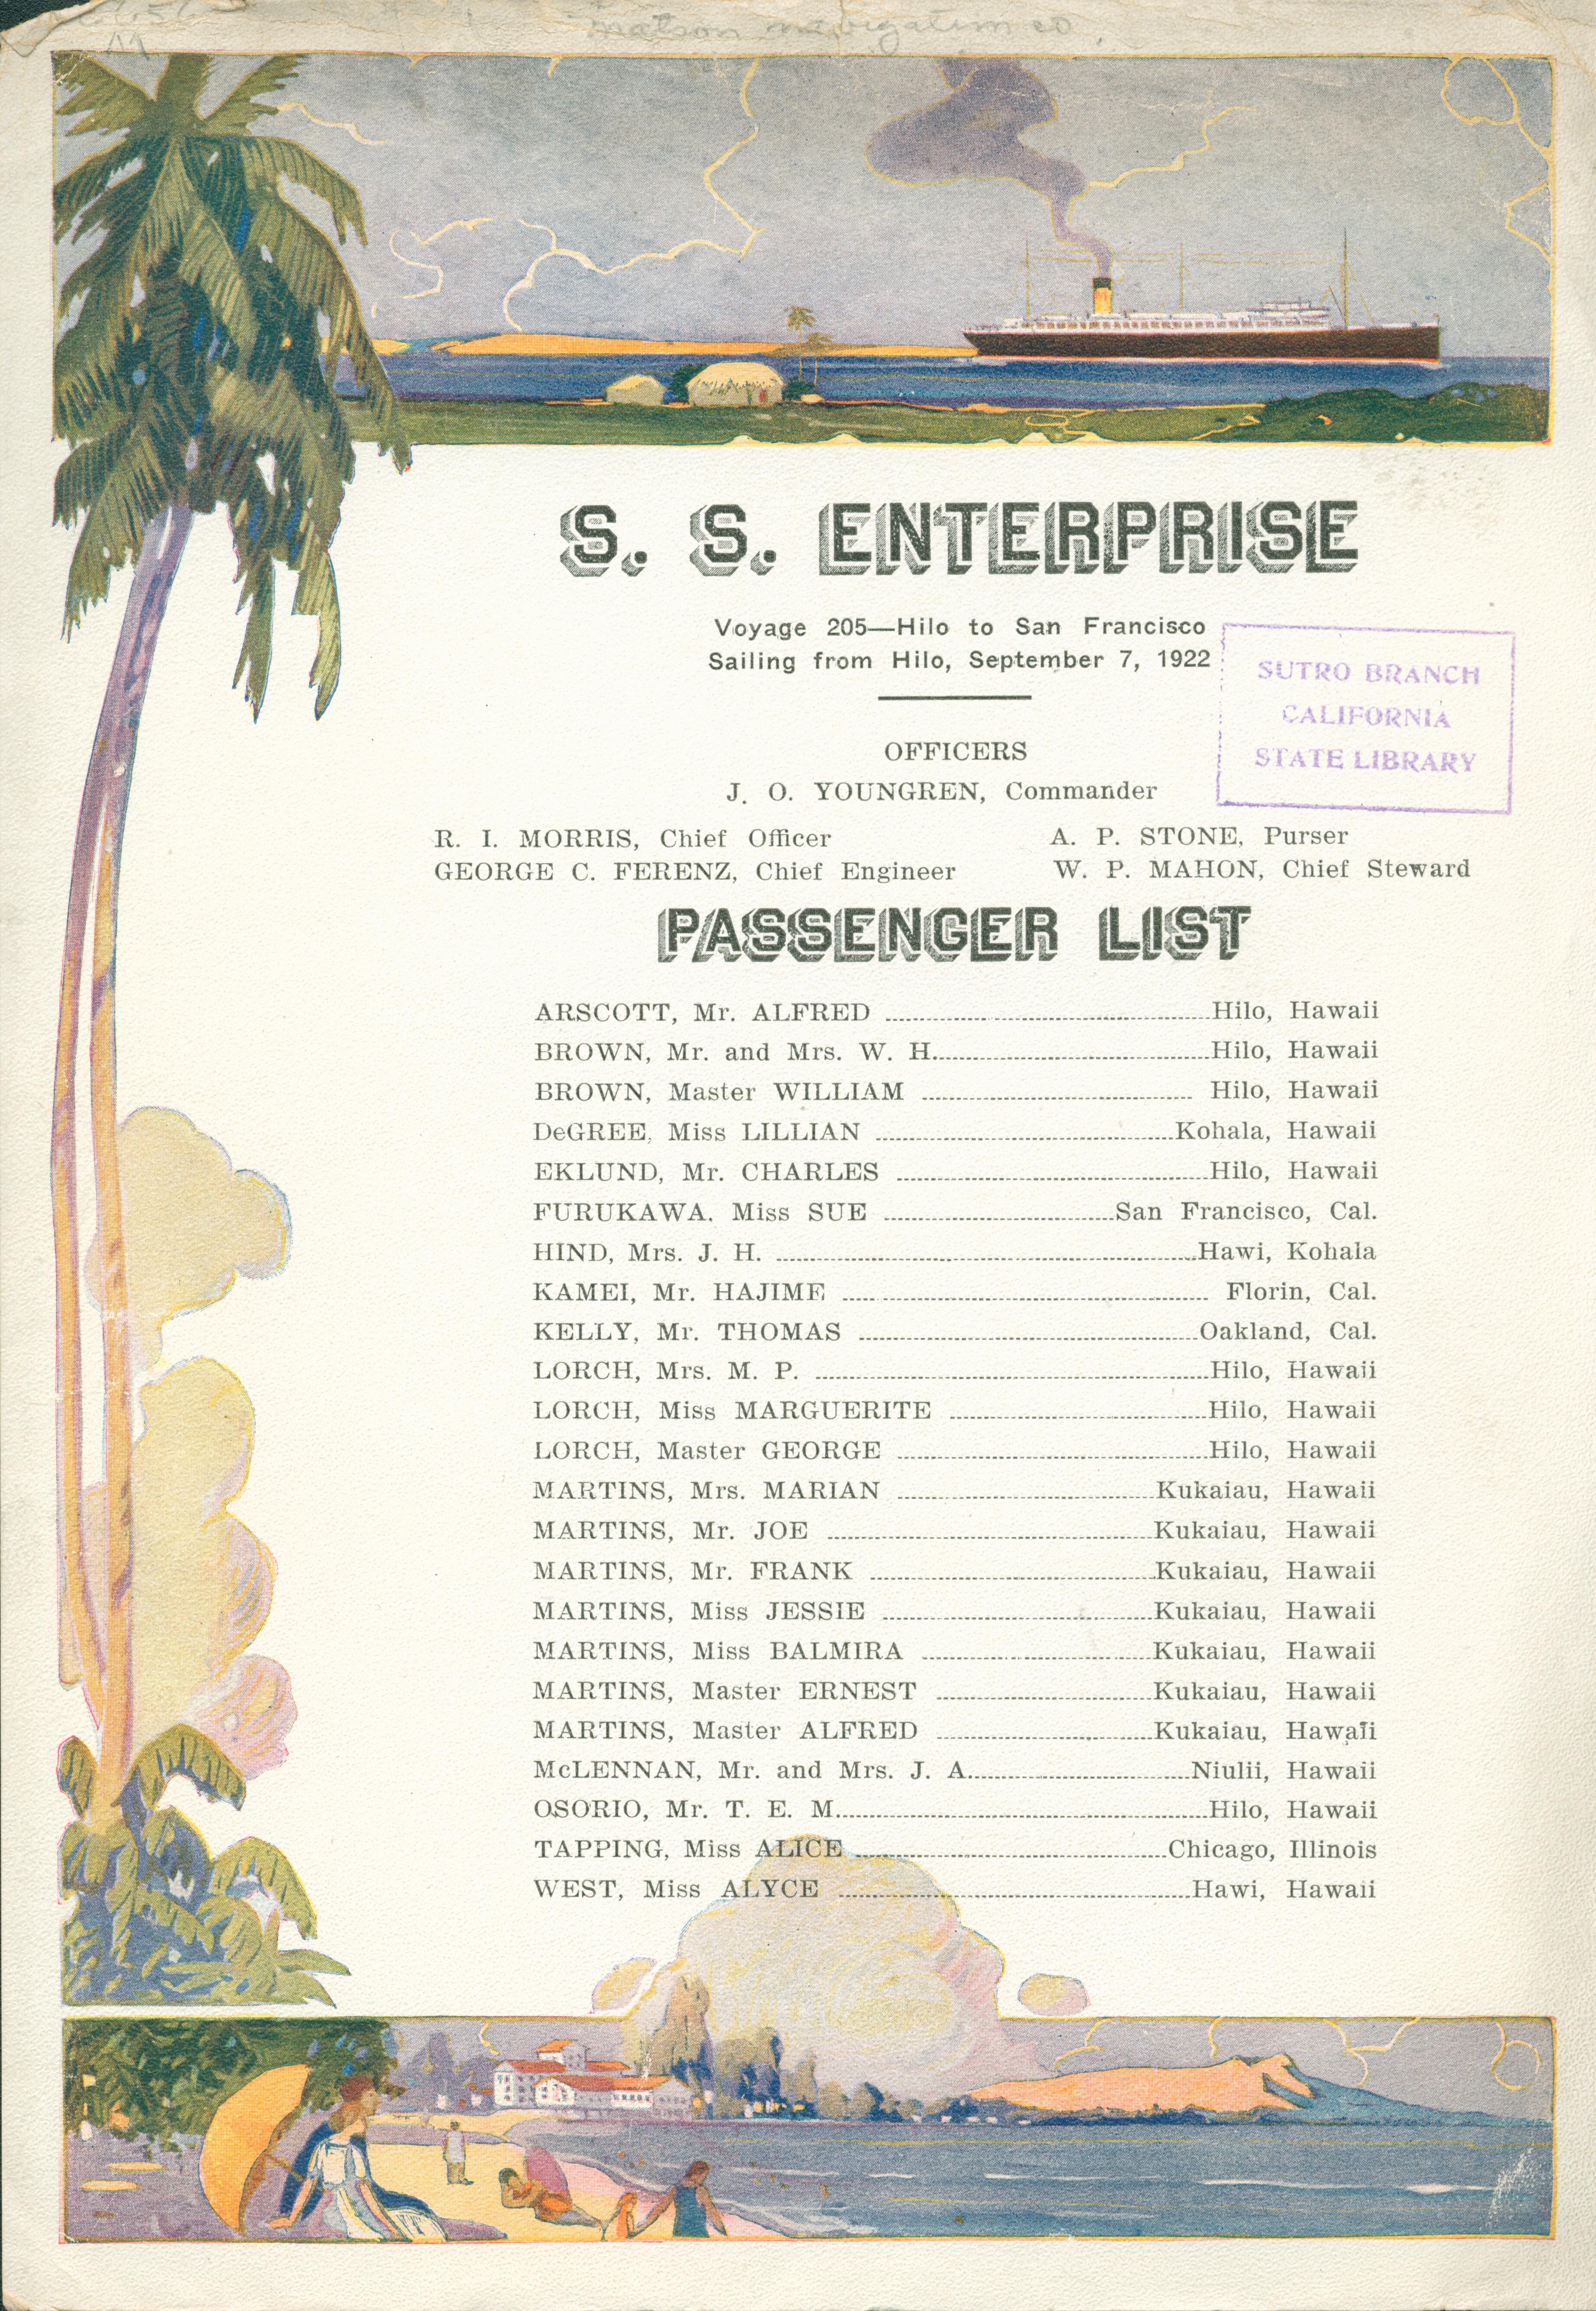 Shows a ship above and a beach below the passenger information with a palm tree framing the left side of the page